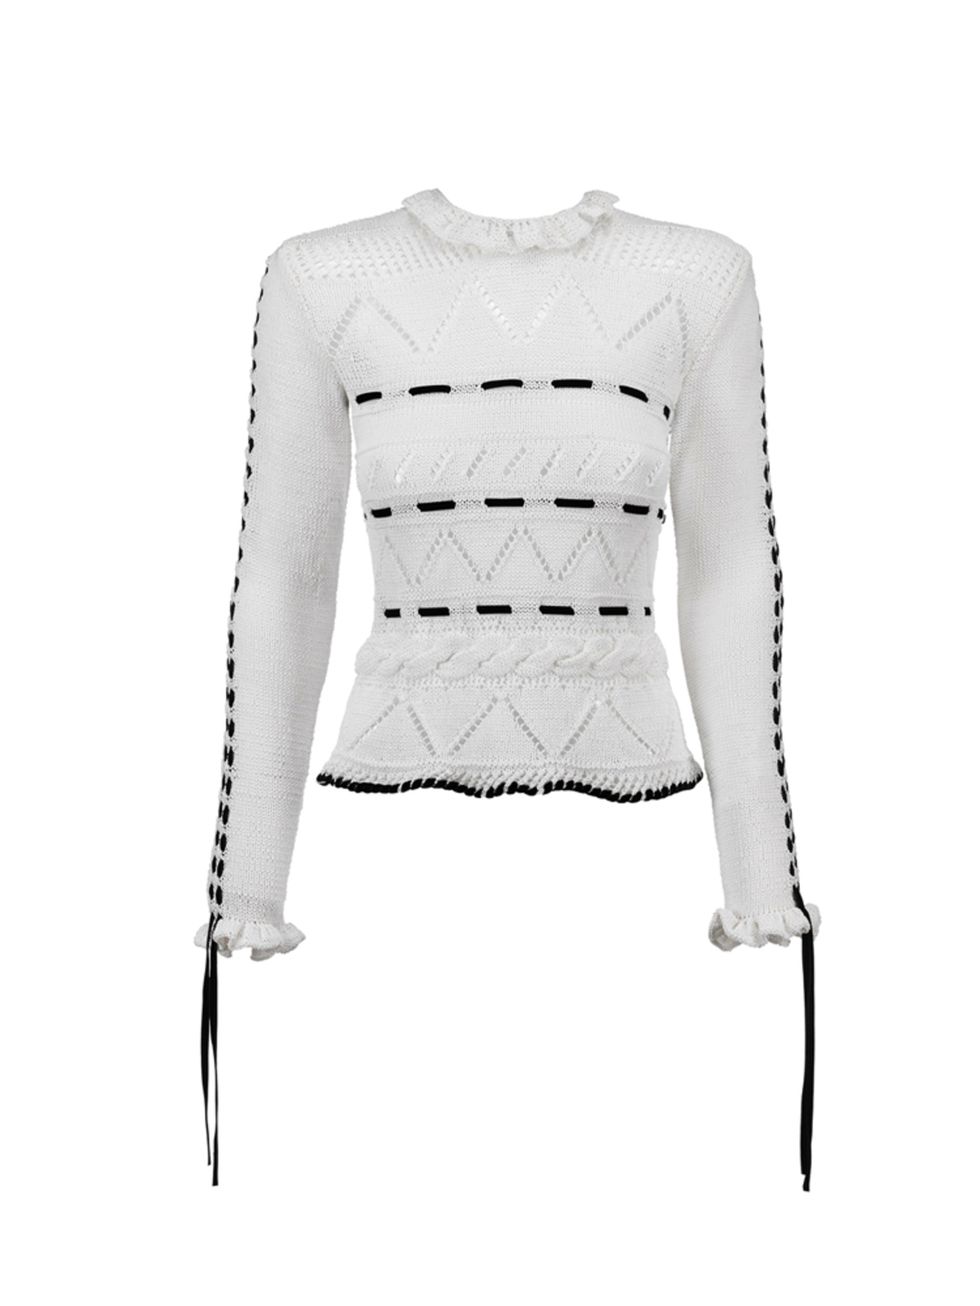 <p> Pretty knitwear to go with anything. </p>

<p><a href="http://www.shop.magdabutrym.com/product/128915" target="_blank">Magda Butrym</a> jumper, £595</p>